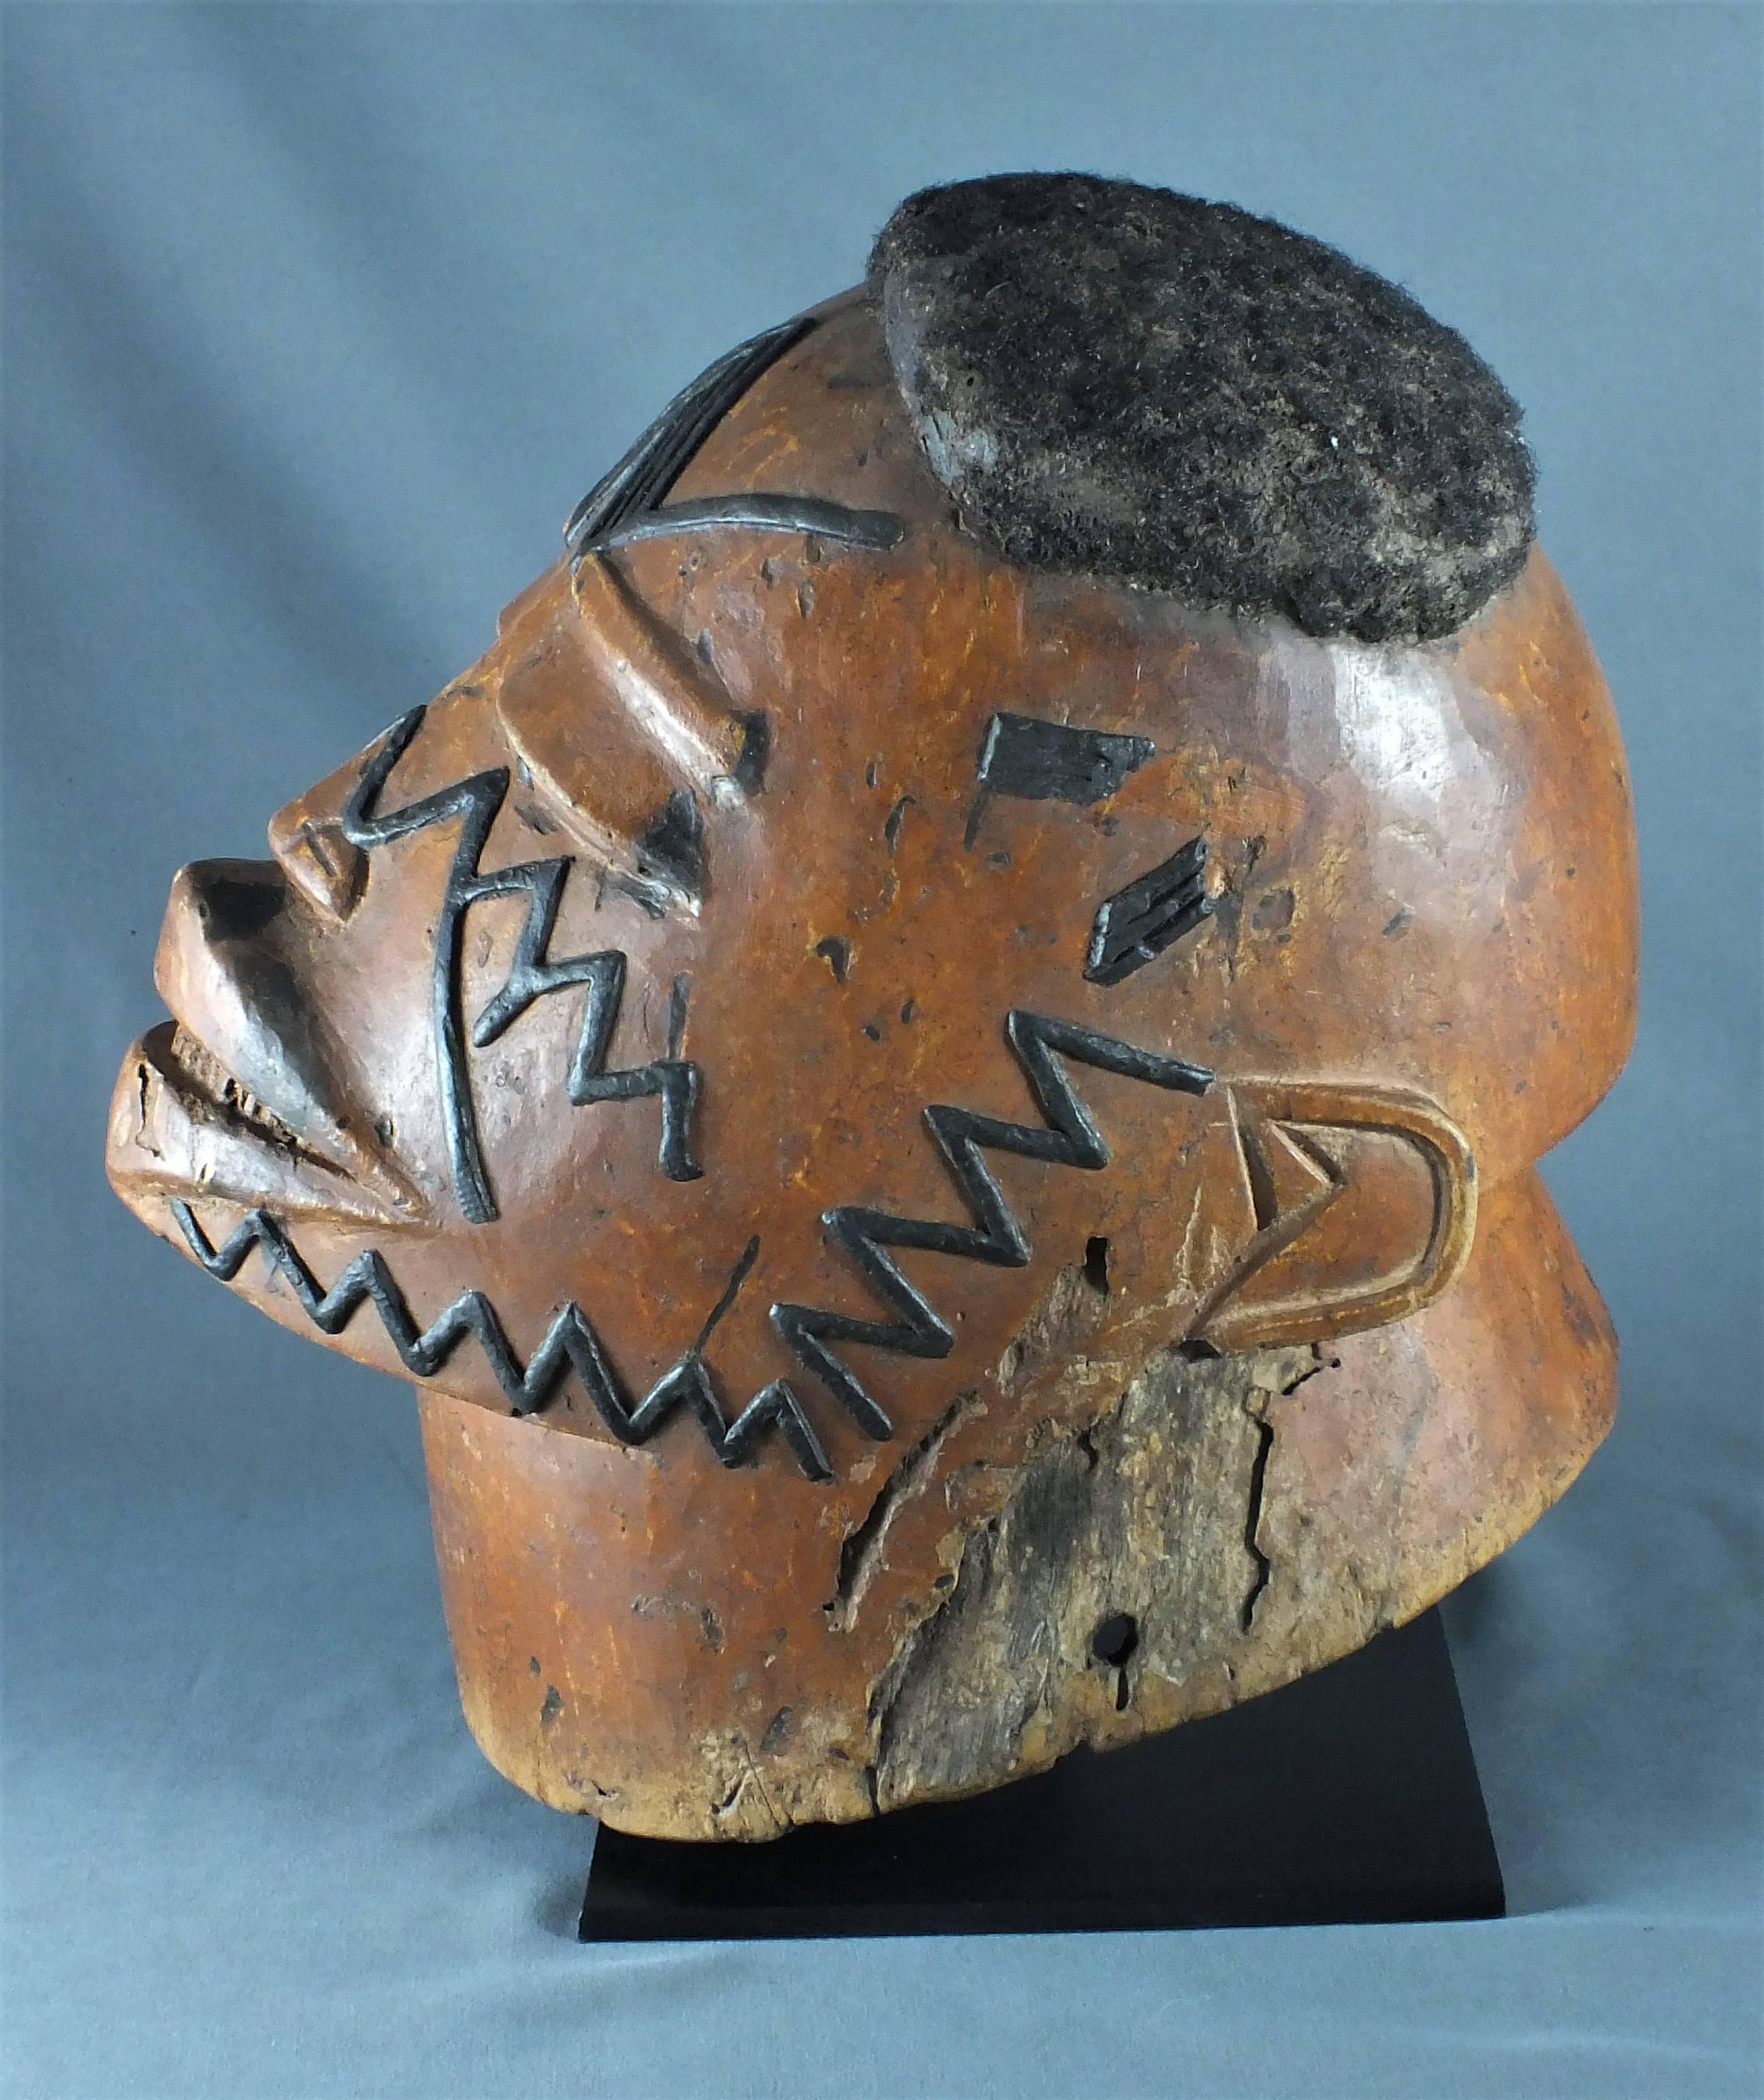 Makonde mask, Tanzania, East Africa early 20th century
Dimension: 23 x 15 x 25 cm
Dimension with stand: 28 x 15 x 26 cm

Helmet mask Makonde, Tanzania. Hard wood with very old patina of use light brown, hair, copper and wax.

This old helmet